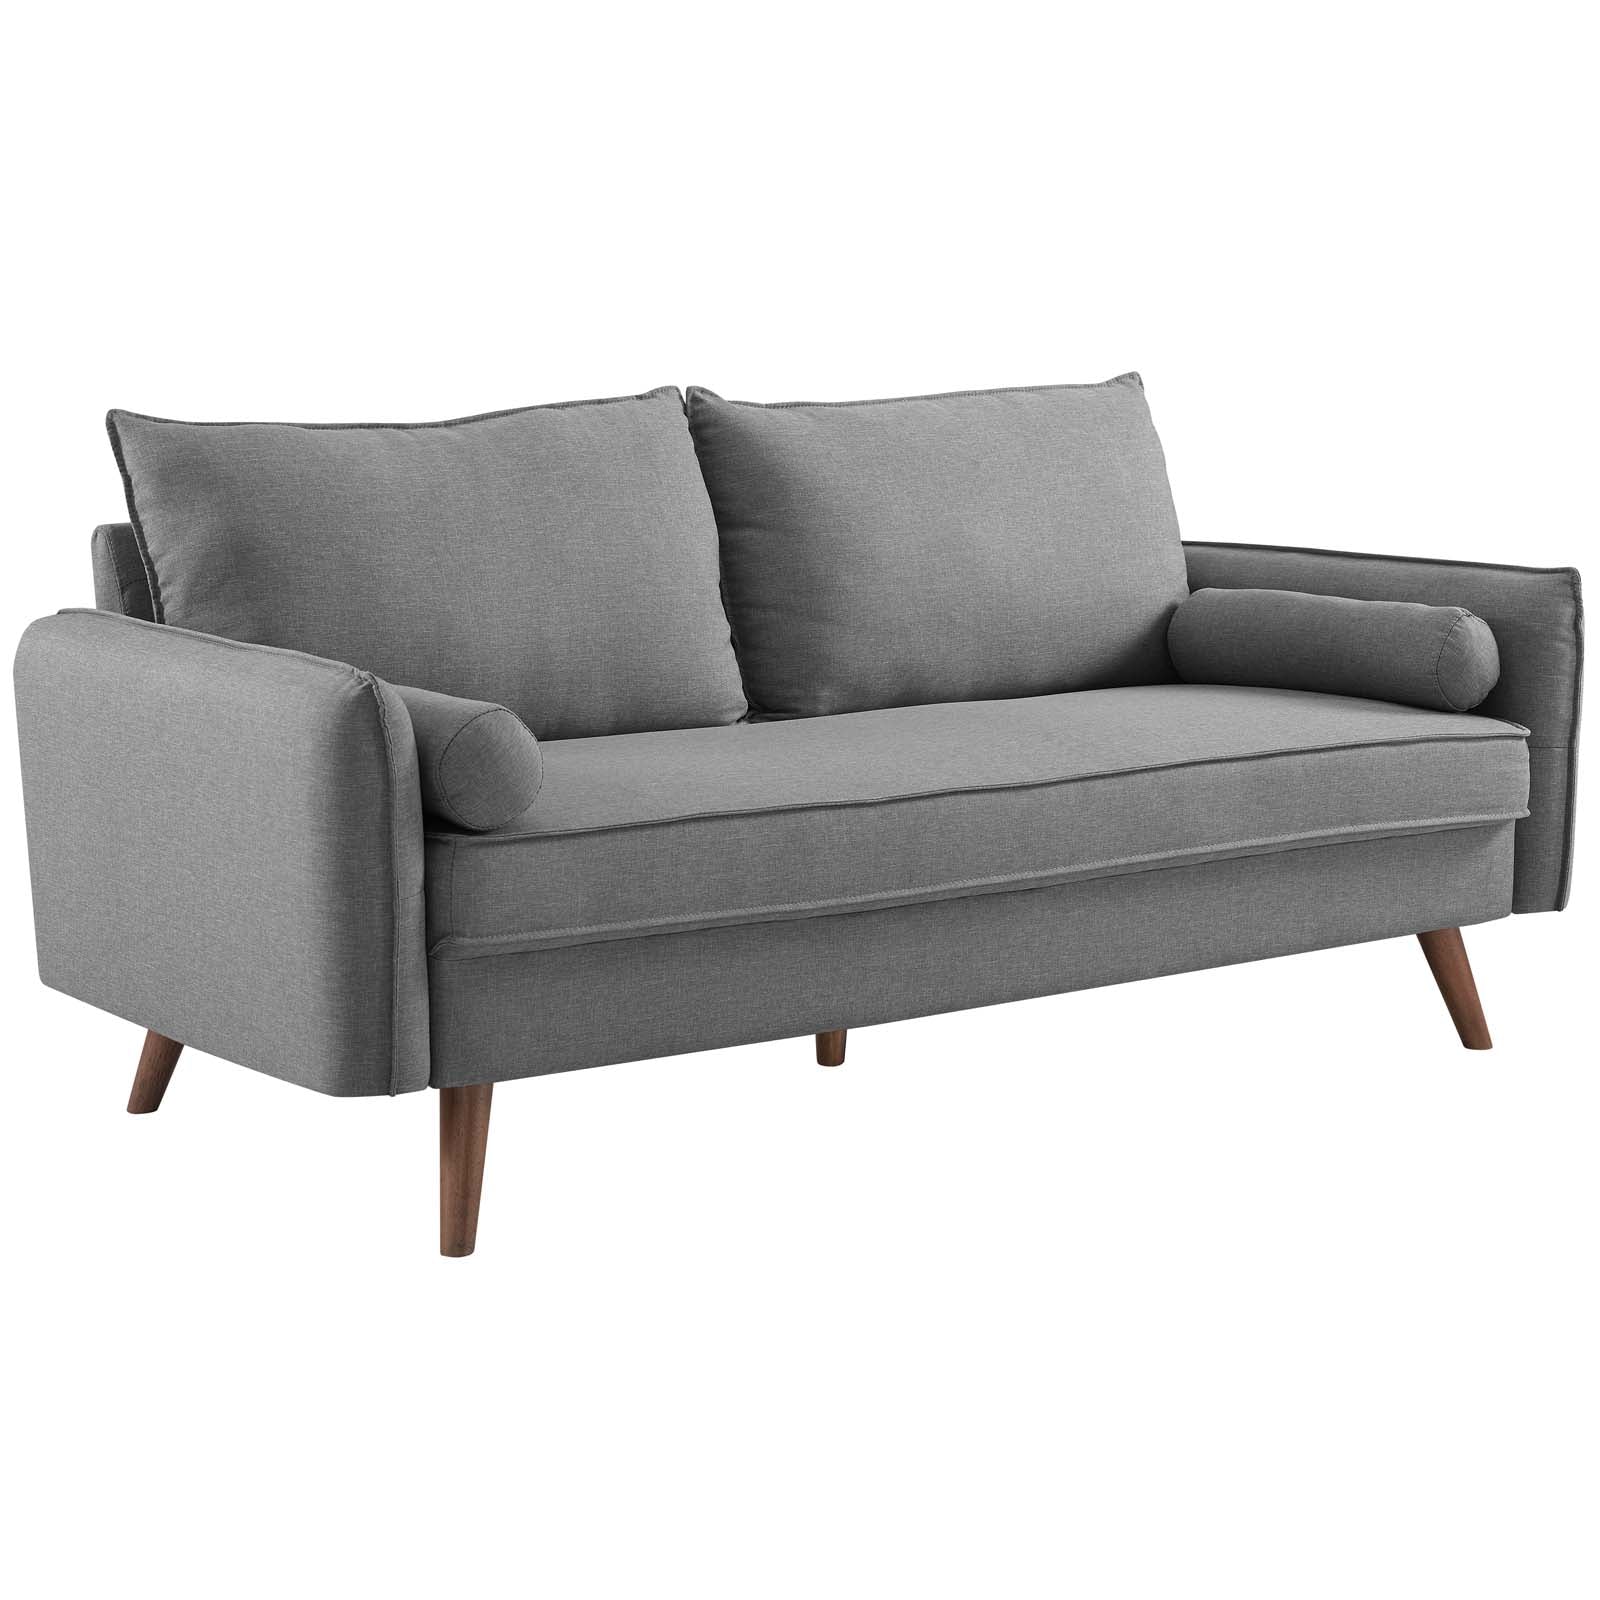 Modway Sofas & Couches - Revive Upholstered Fabric Sofa Light Gray